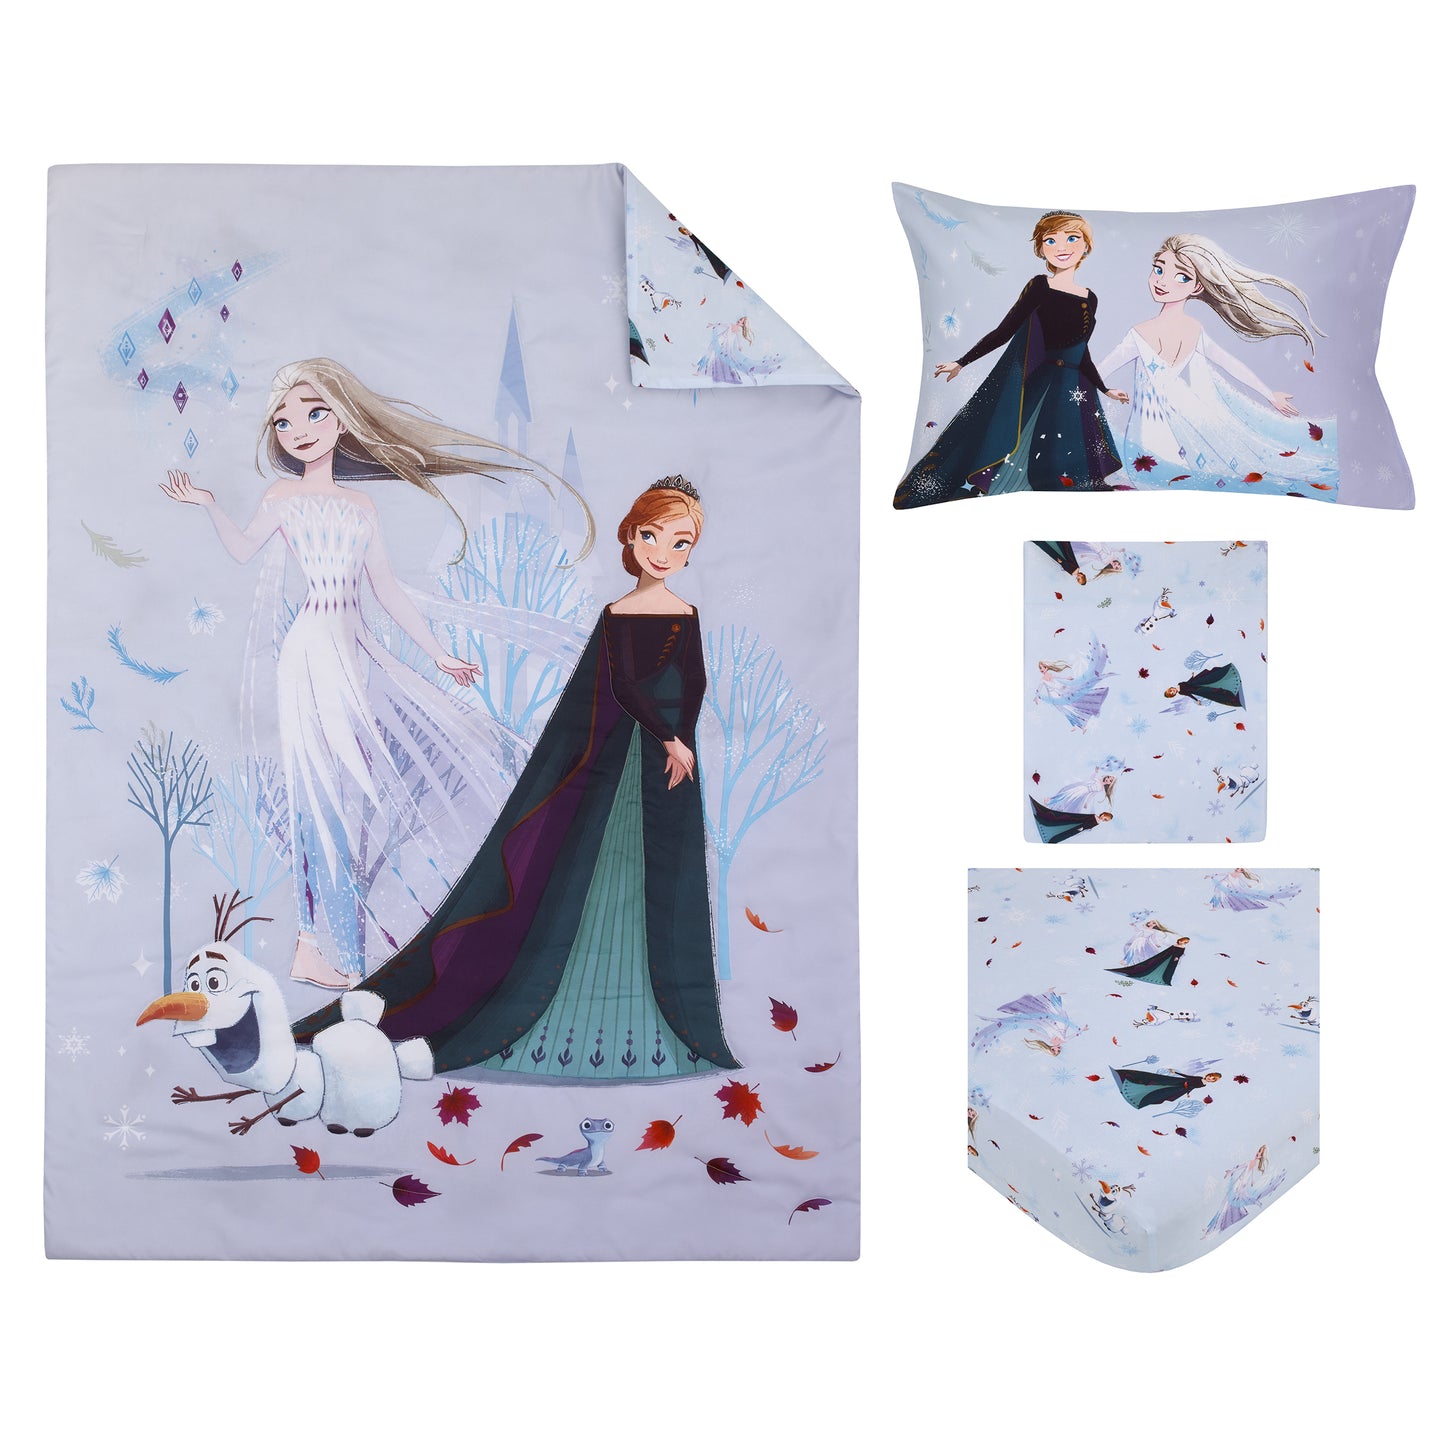 Disney Frozen Winter Cheer Lavender, Aqua, Green and White, Anna, Elsa, and Olaf 4 Piece Toddler Bed Set - Comforter, Fitted Bottom Sheet, Flat Top Sheet, and Reversible Pillowcase